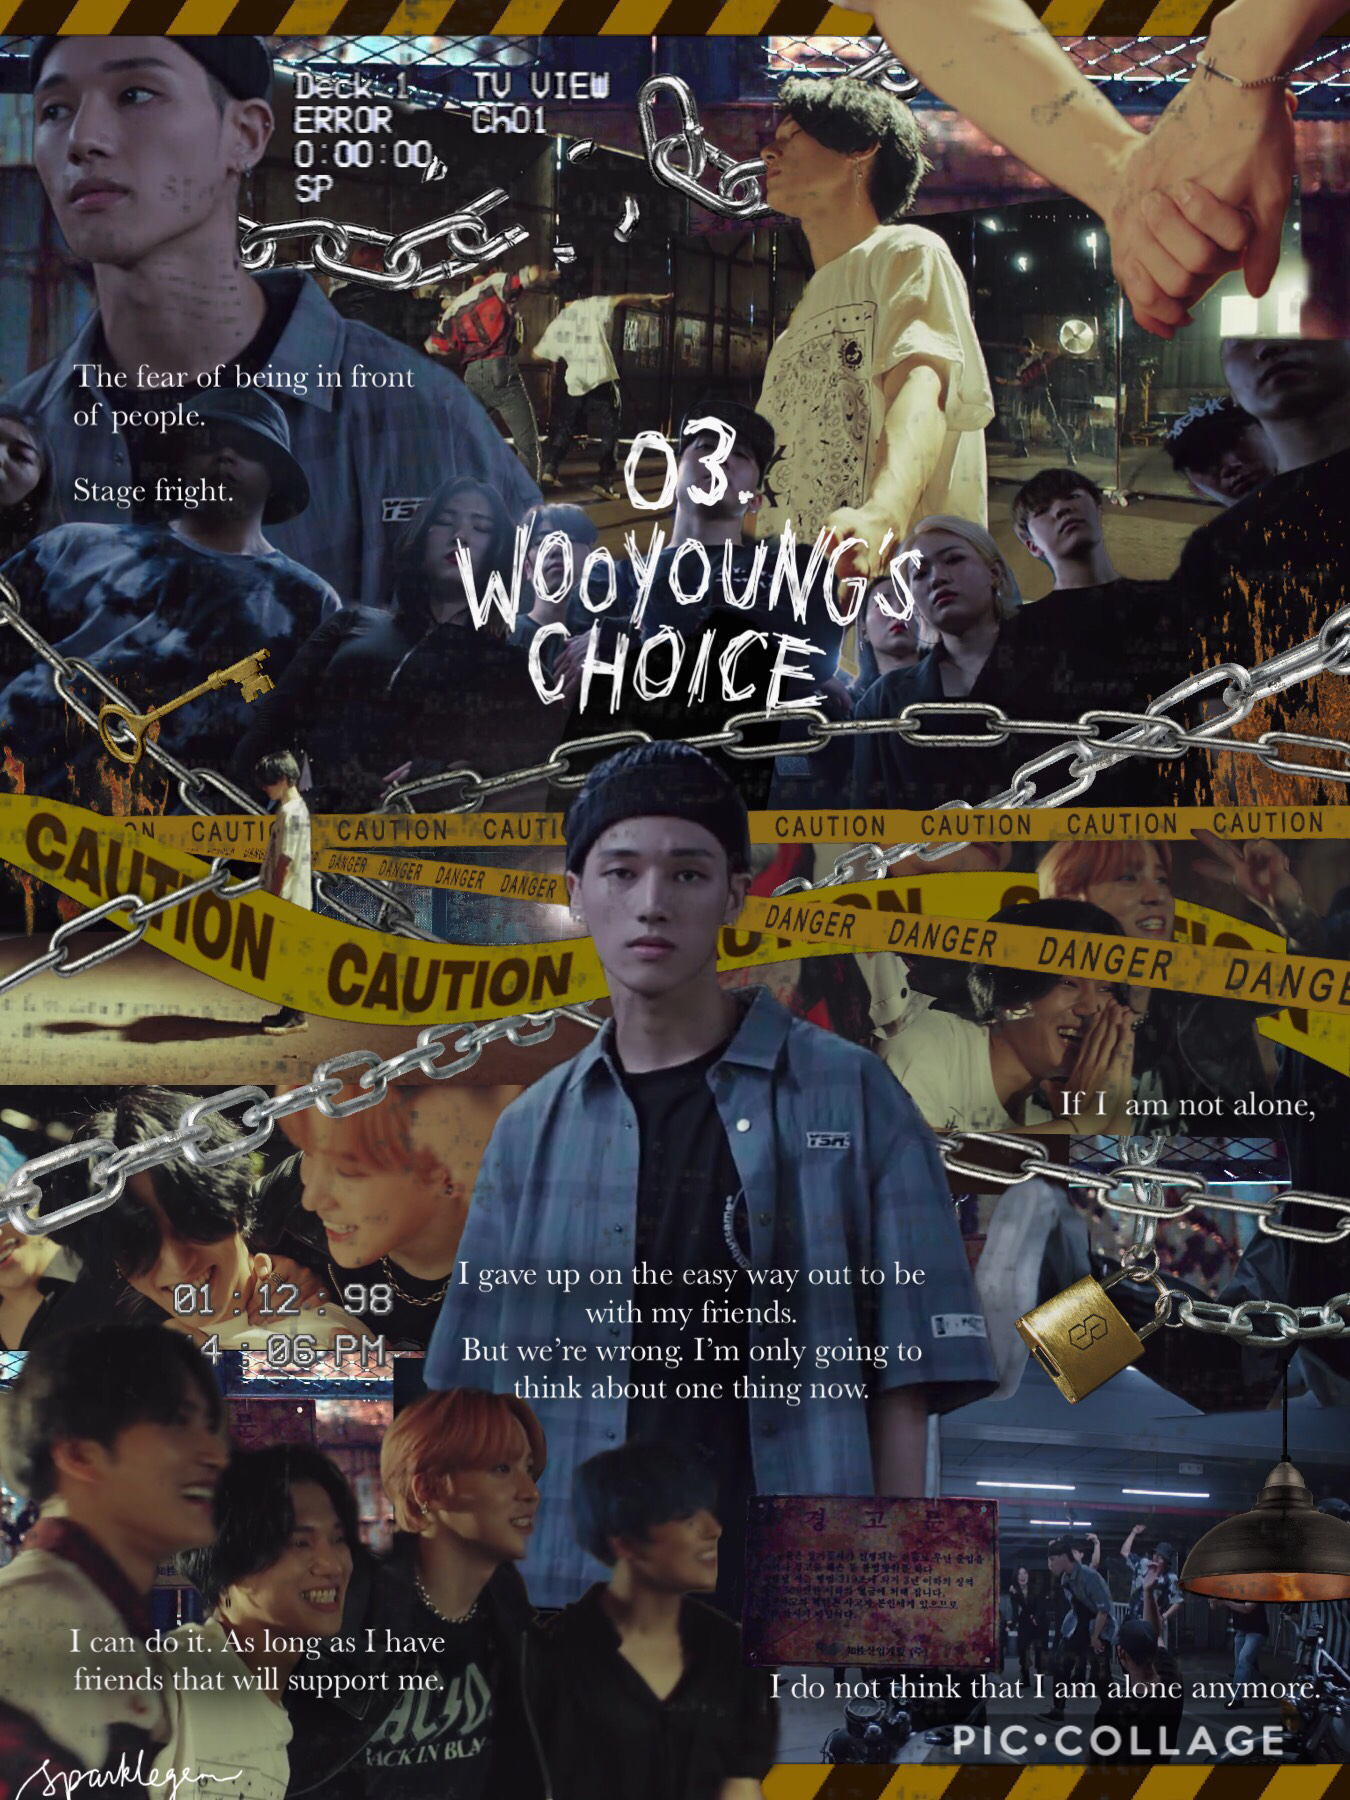 [4/10] 03. “Wooyoung’s Choice” | friendship seems to be important to WY but I feel like this “choice” of his is deciding whether to follow or betray his friends. The chains prob foreshadow his later betrayal & the locked gate could mean he can’t turn back